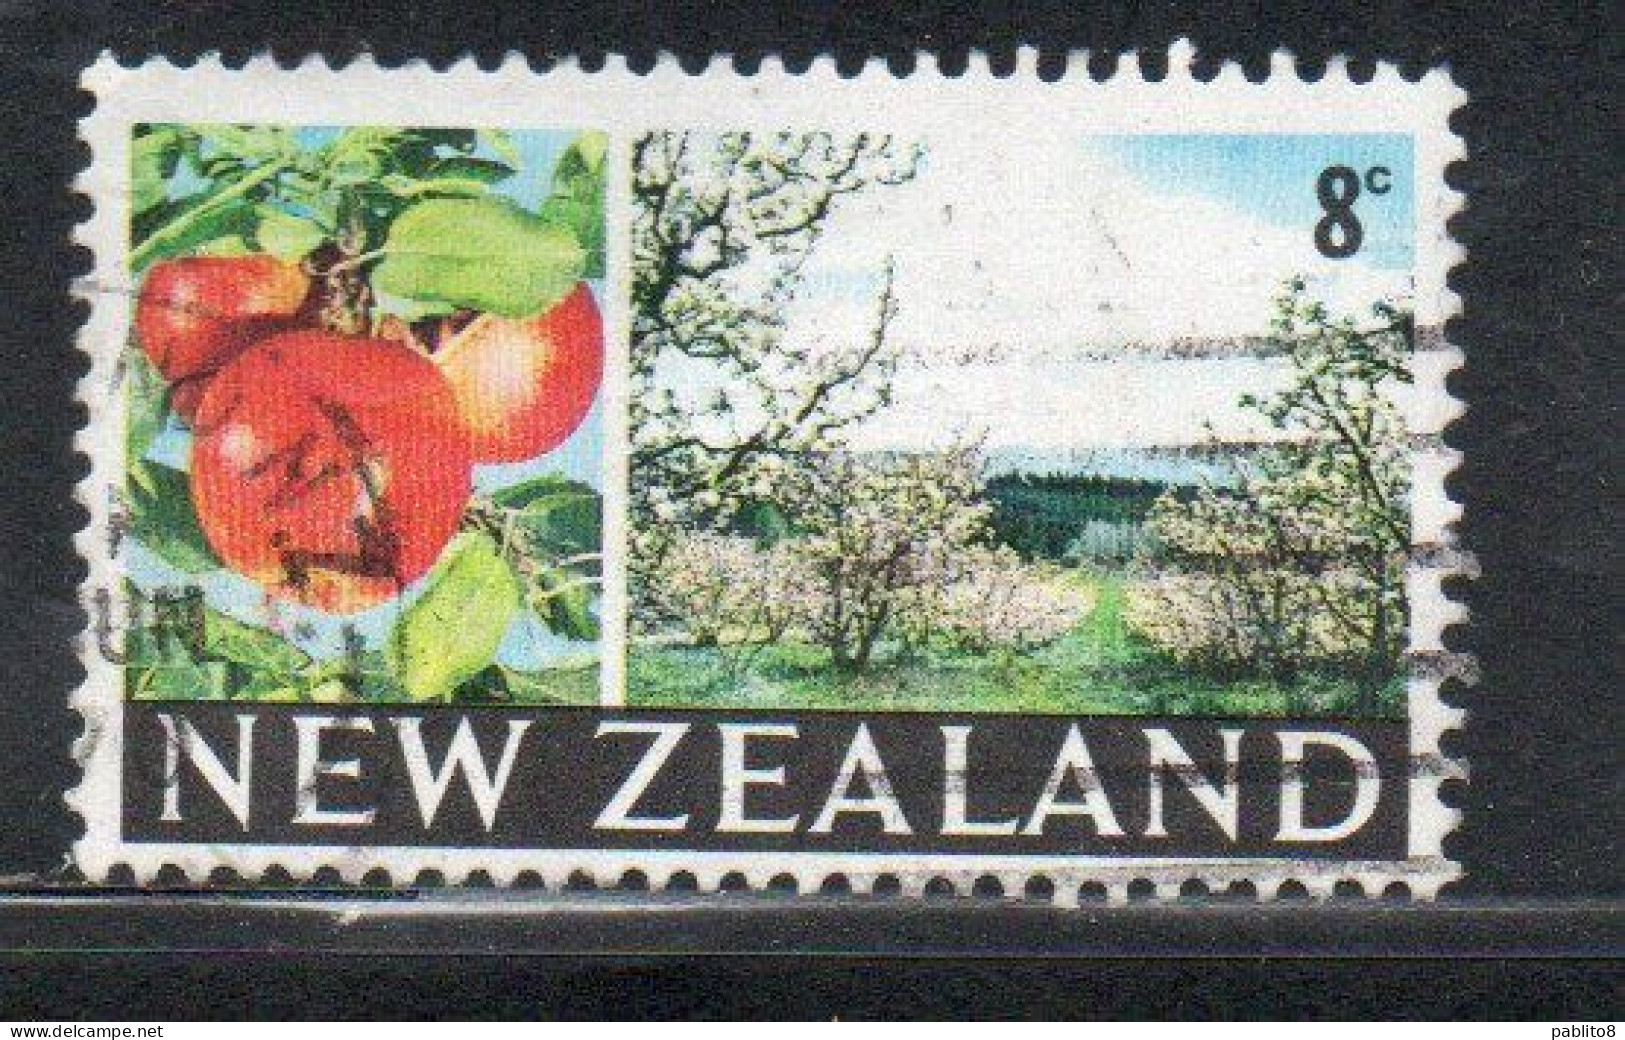 NEW ZEALAND NUOVA ZELANDA 1968 1969 APPLES AND ORCHARD 8c USED USATO OBLITERE' - Used Stamps